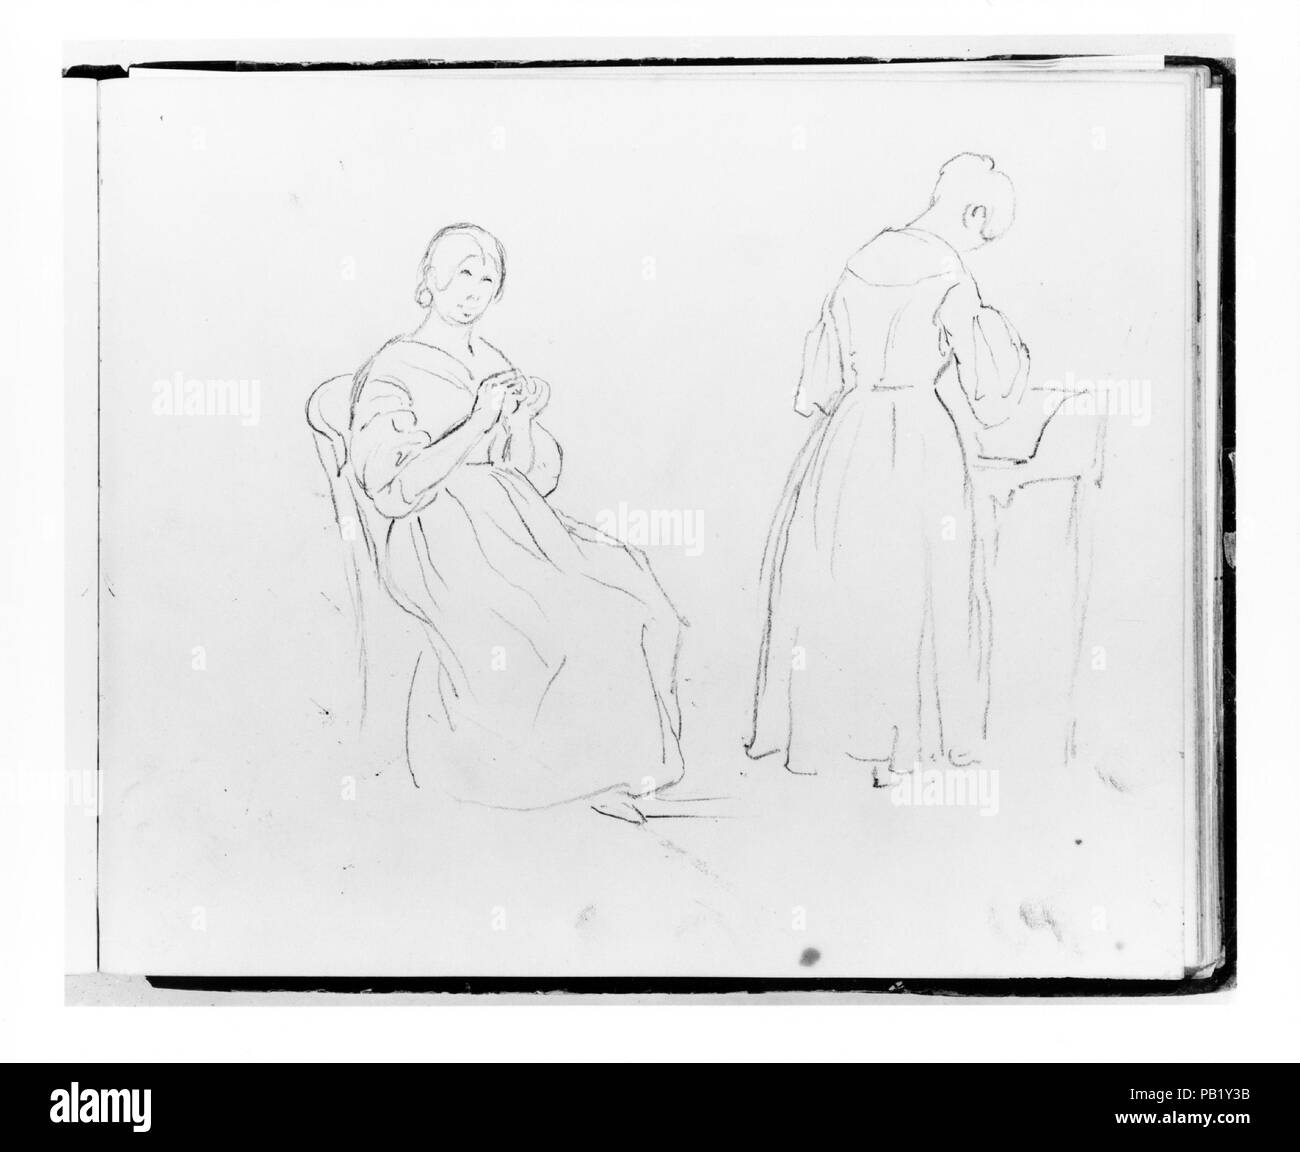 Two Studies: Woman Sewing; Woman at a Desk (from Sketchbook). Artist: Francis William Edmonds (American, Hudson, New York 1806-1863 Bronxville, New York). Dimensions: 6 5/8 x 8 in. (16.8 x 20.3 cm). Date: ca. 1838 and after.  The execution of sketches and studies was a crucial part of Edmonds's creative process. Many of his drawings exist as independent works--apparently never taken further--but many others represent an initial step in his conception for paintings. This sketchbook, which he began about 1838, includes both types of drawings of a variety of subjects. Museum: Metropolitan Museum  Stock Photo